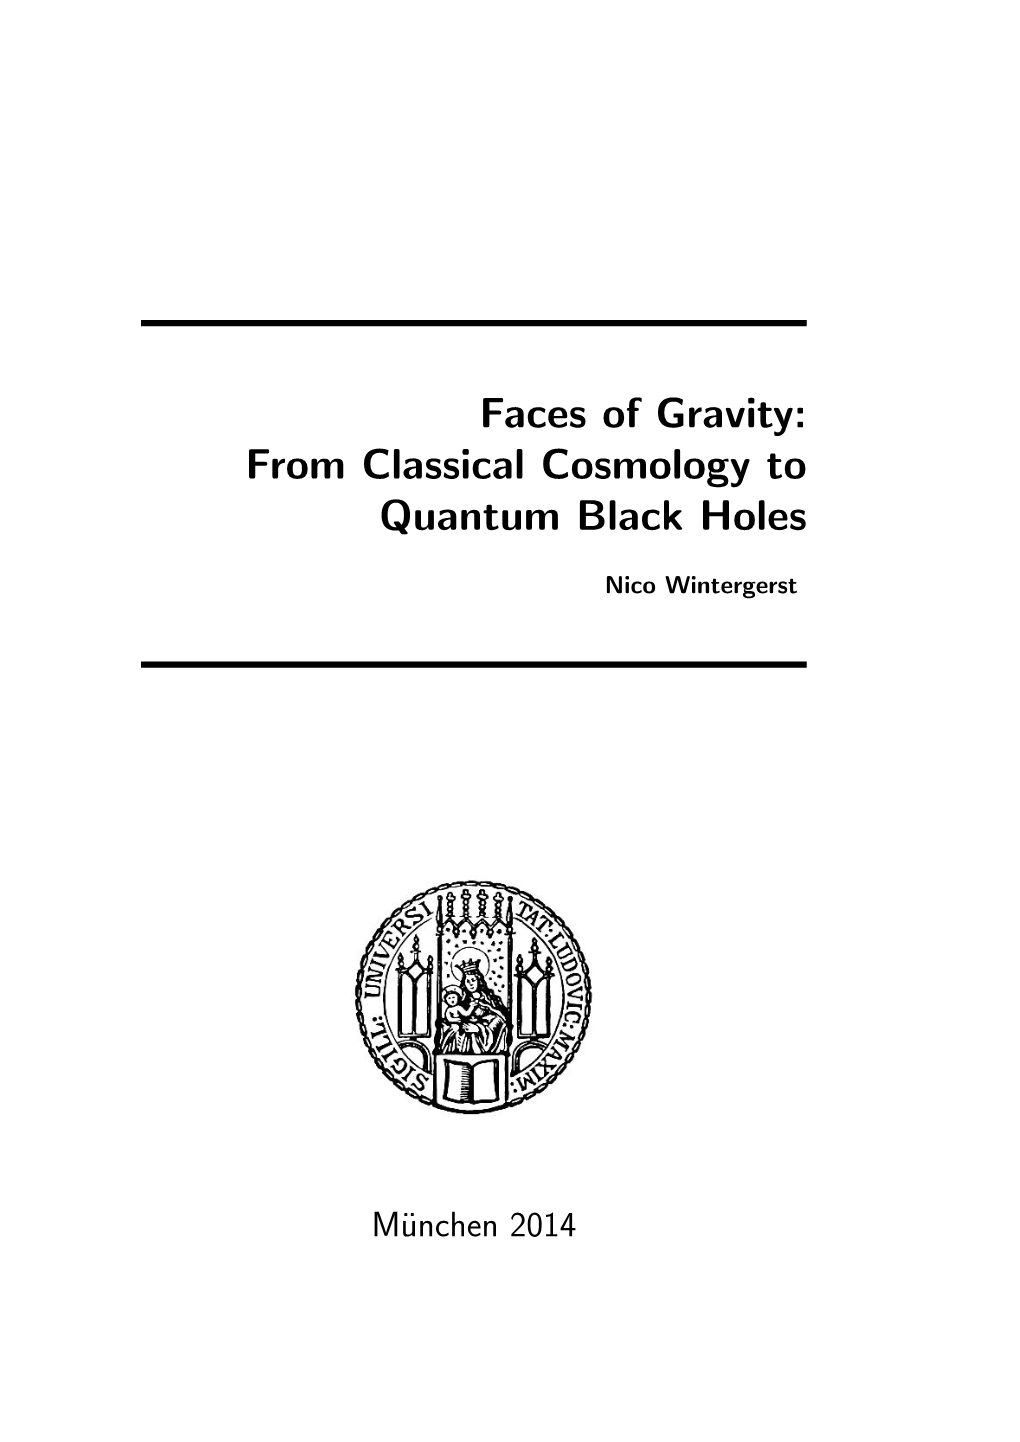 Faces of Gravity: from Classical Cosmology to Quantum Black Holes